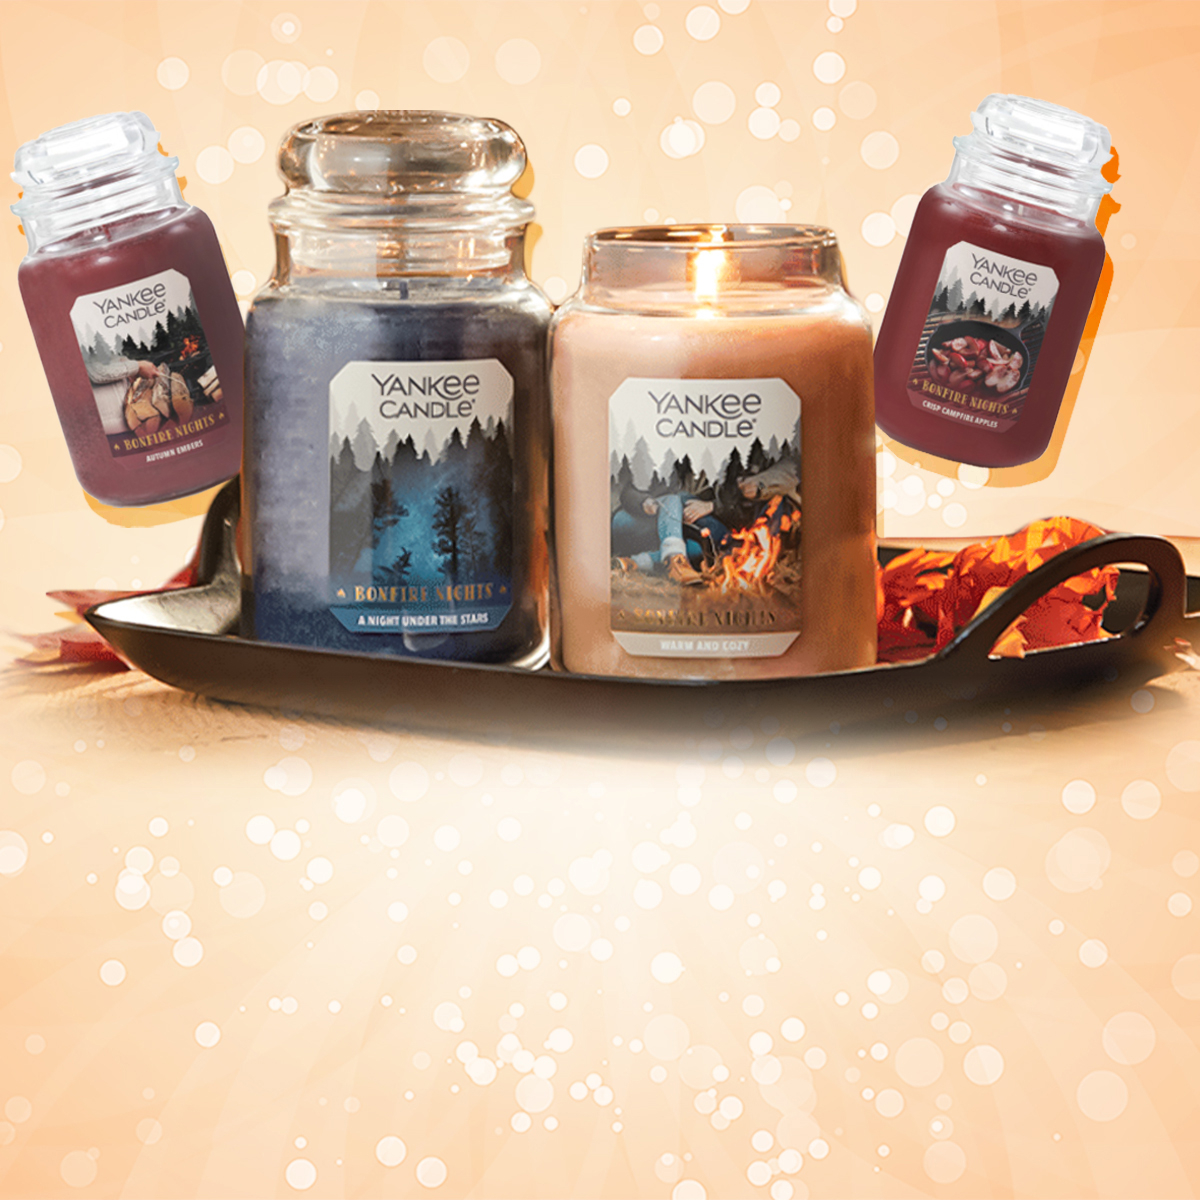 Yankee Candle Bonfire Nights Collection home fragrances - The Perfume Girl